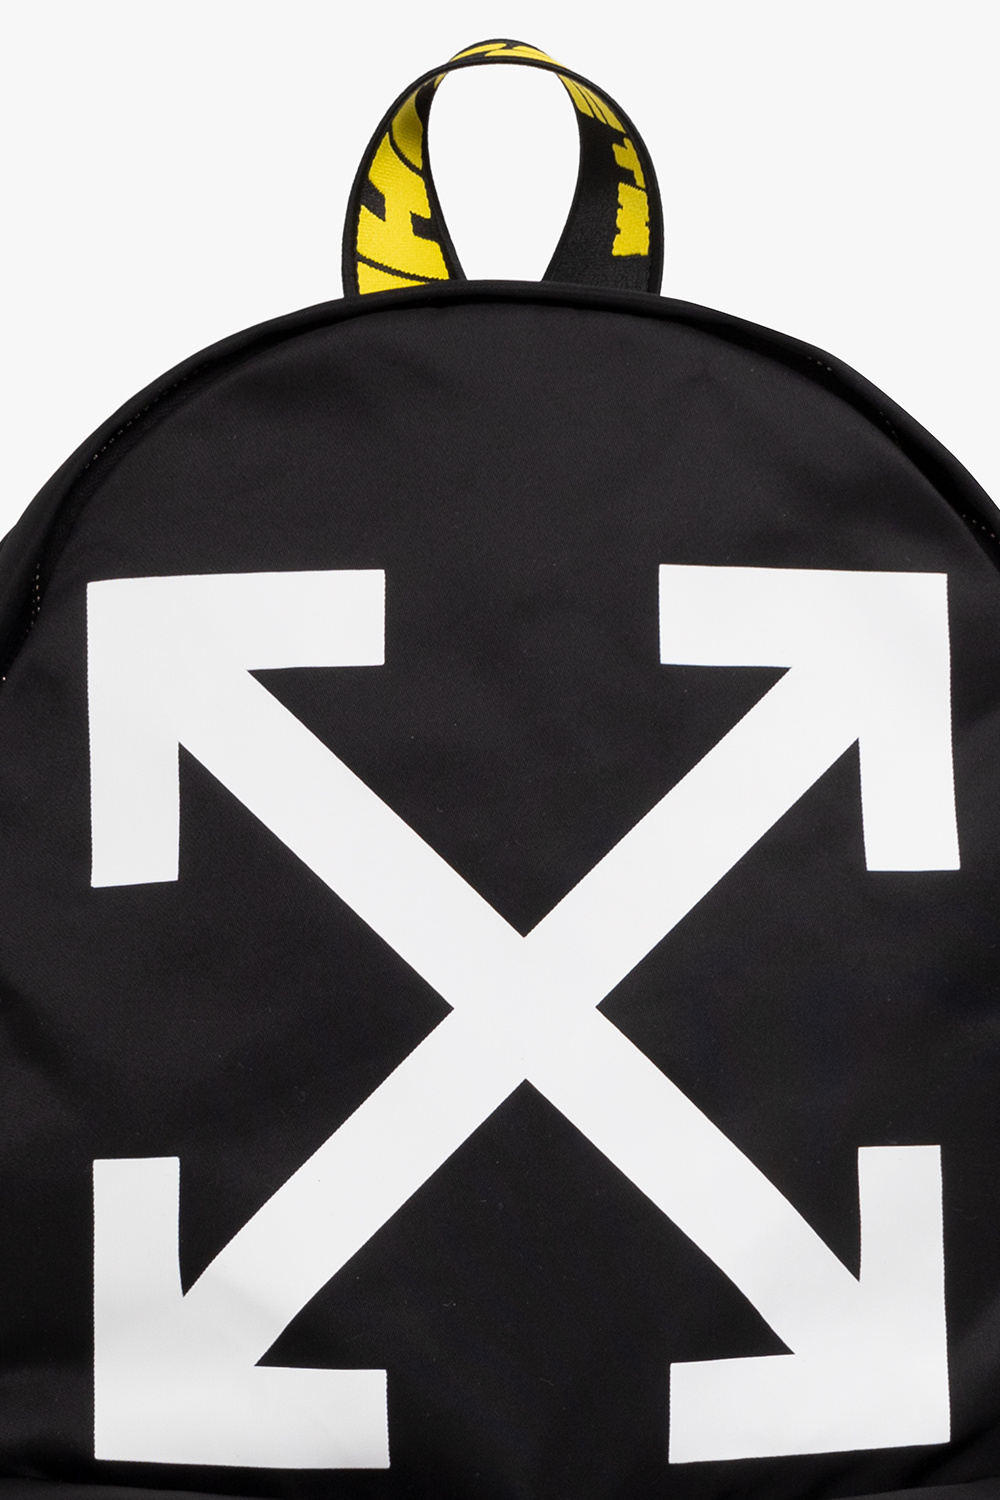 Off-White Black and Red Arrows Backpack Off-White